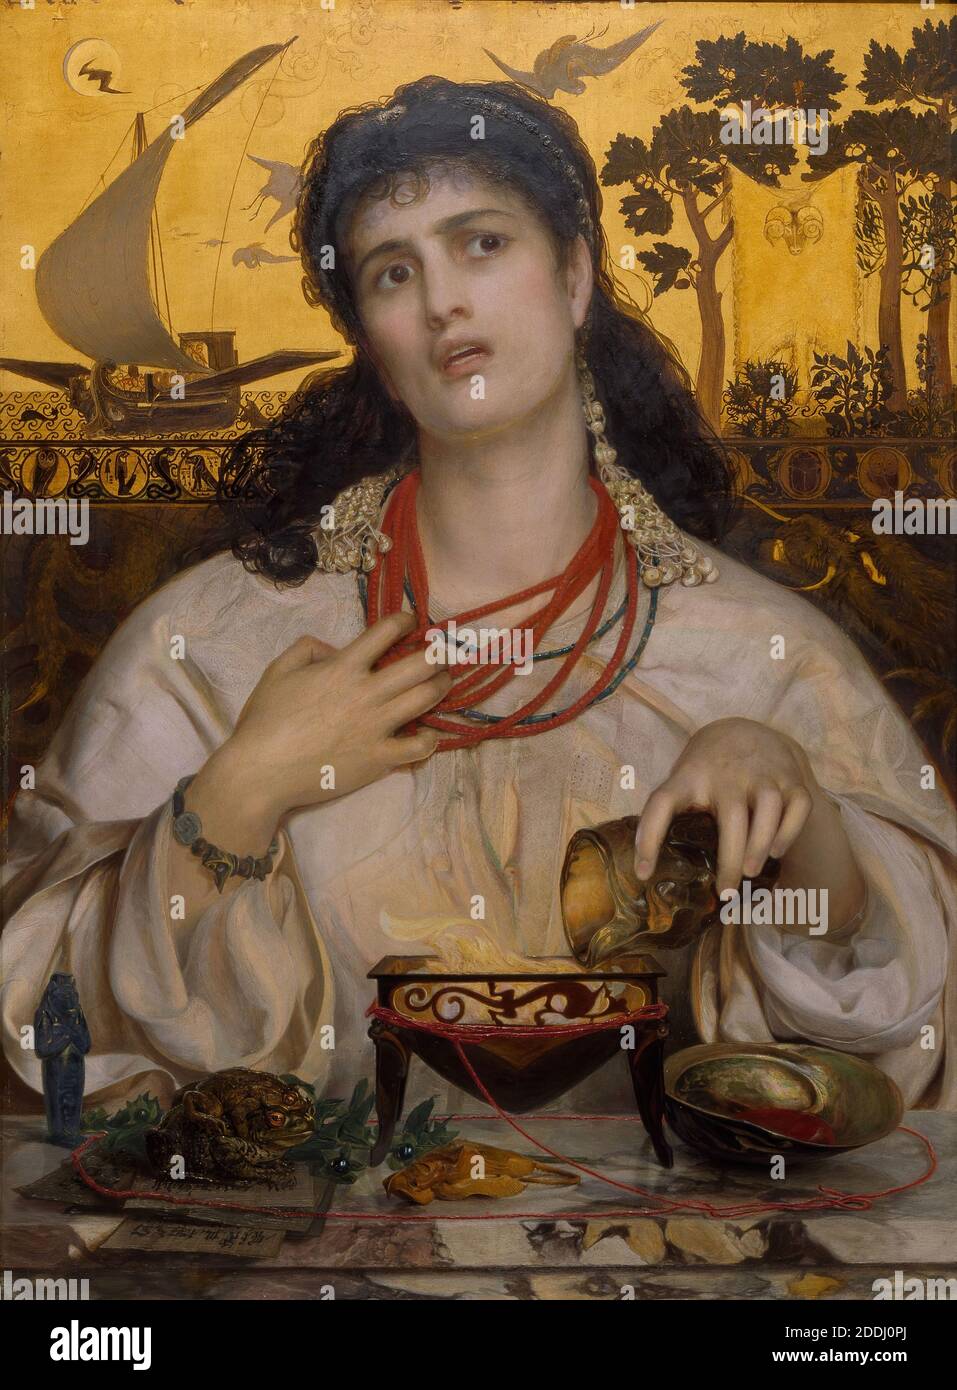 Medea, 1868 Artist: Frederick Sandys, Greek legend describes Medea as a sorceress and the wife of Jason. When he deserted her for another woman, Medea poisoned both her rival (Glauce) and her two children., Art Movement, Pre-Raphaelite, Greek Mythology, Oil Painting, Magic, Animal, Toad Stock Photo